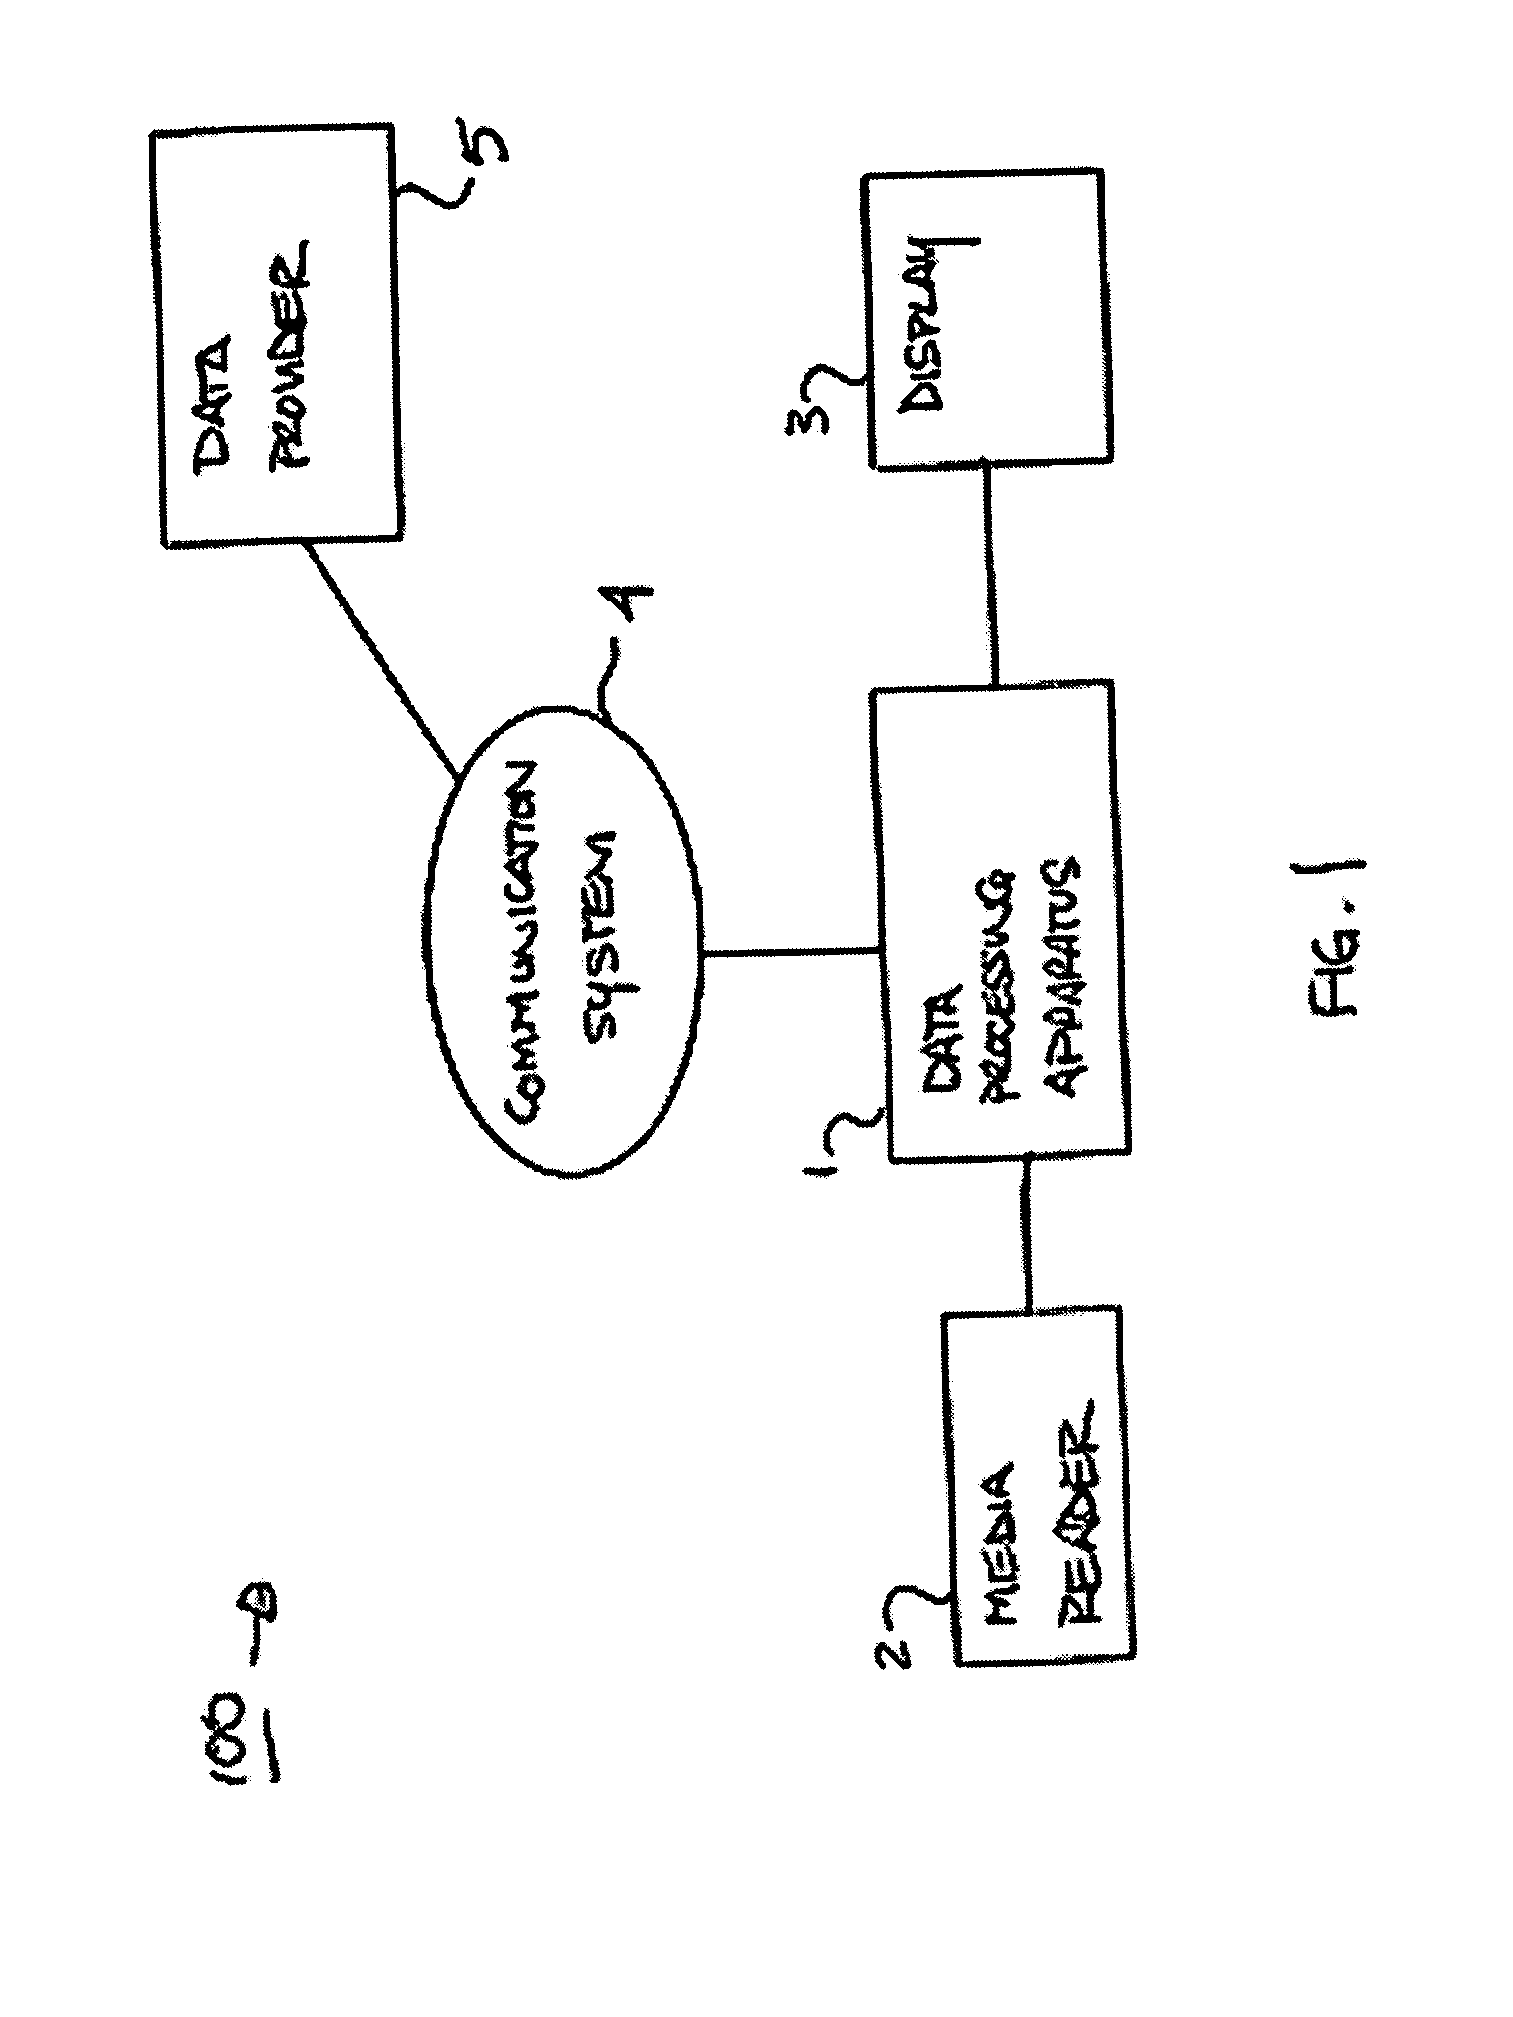 Storage media access control method and system